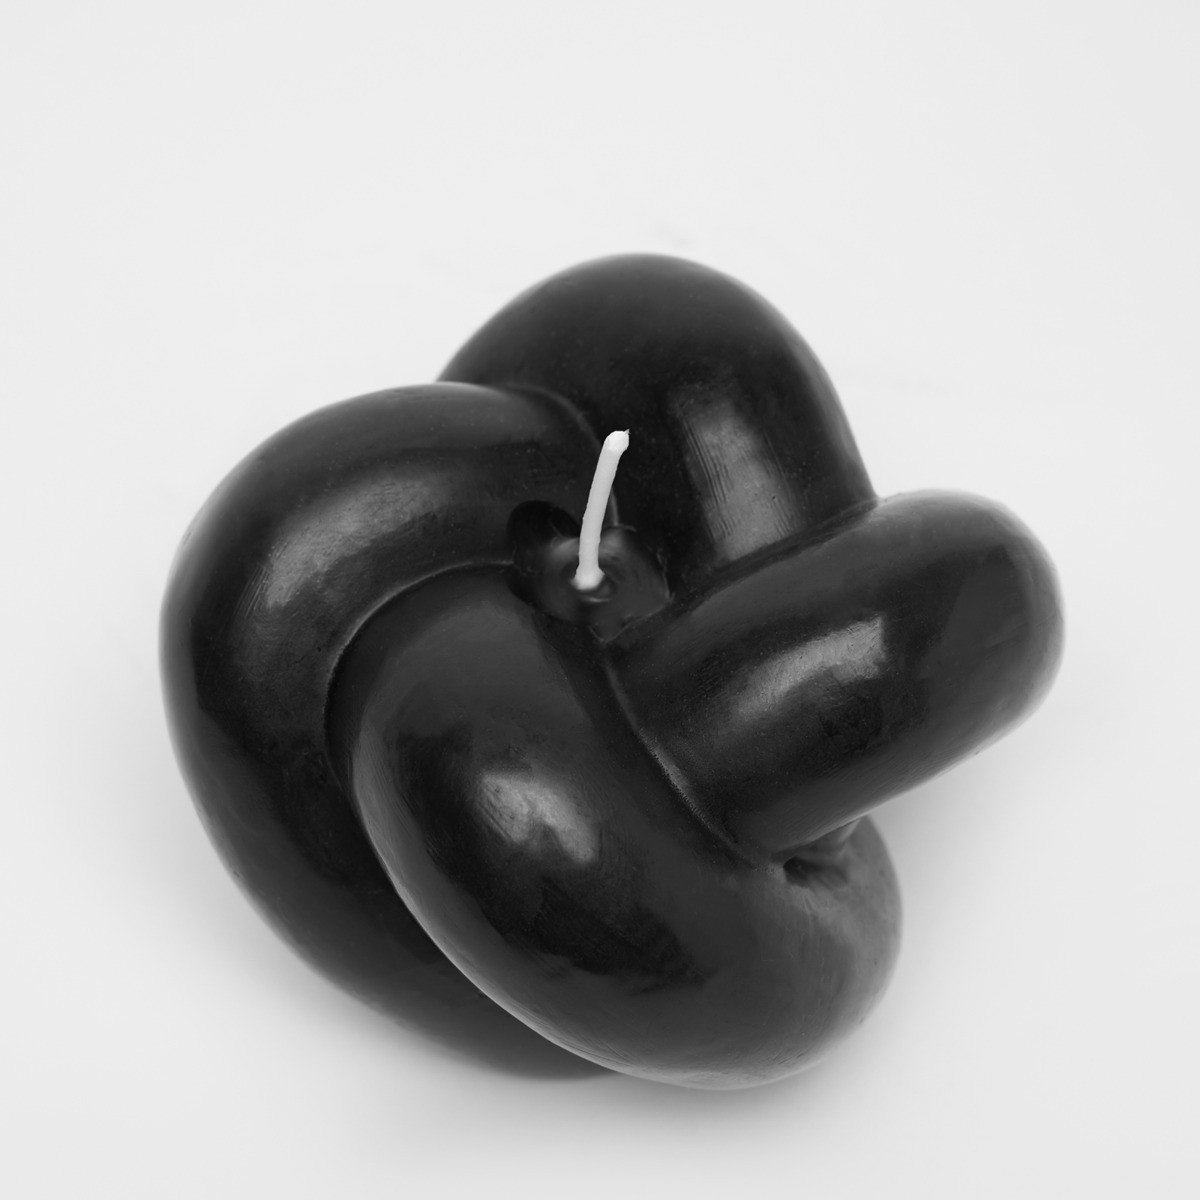 OHS Knot Decorative Candle - Black>